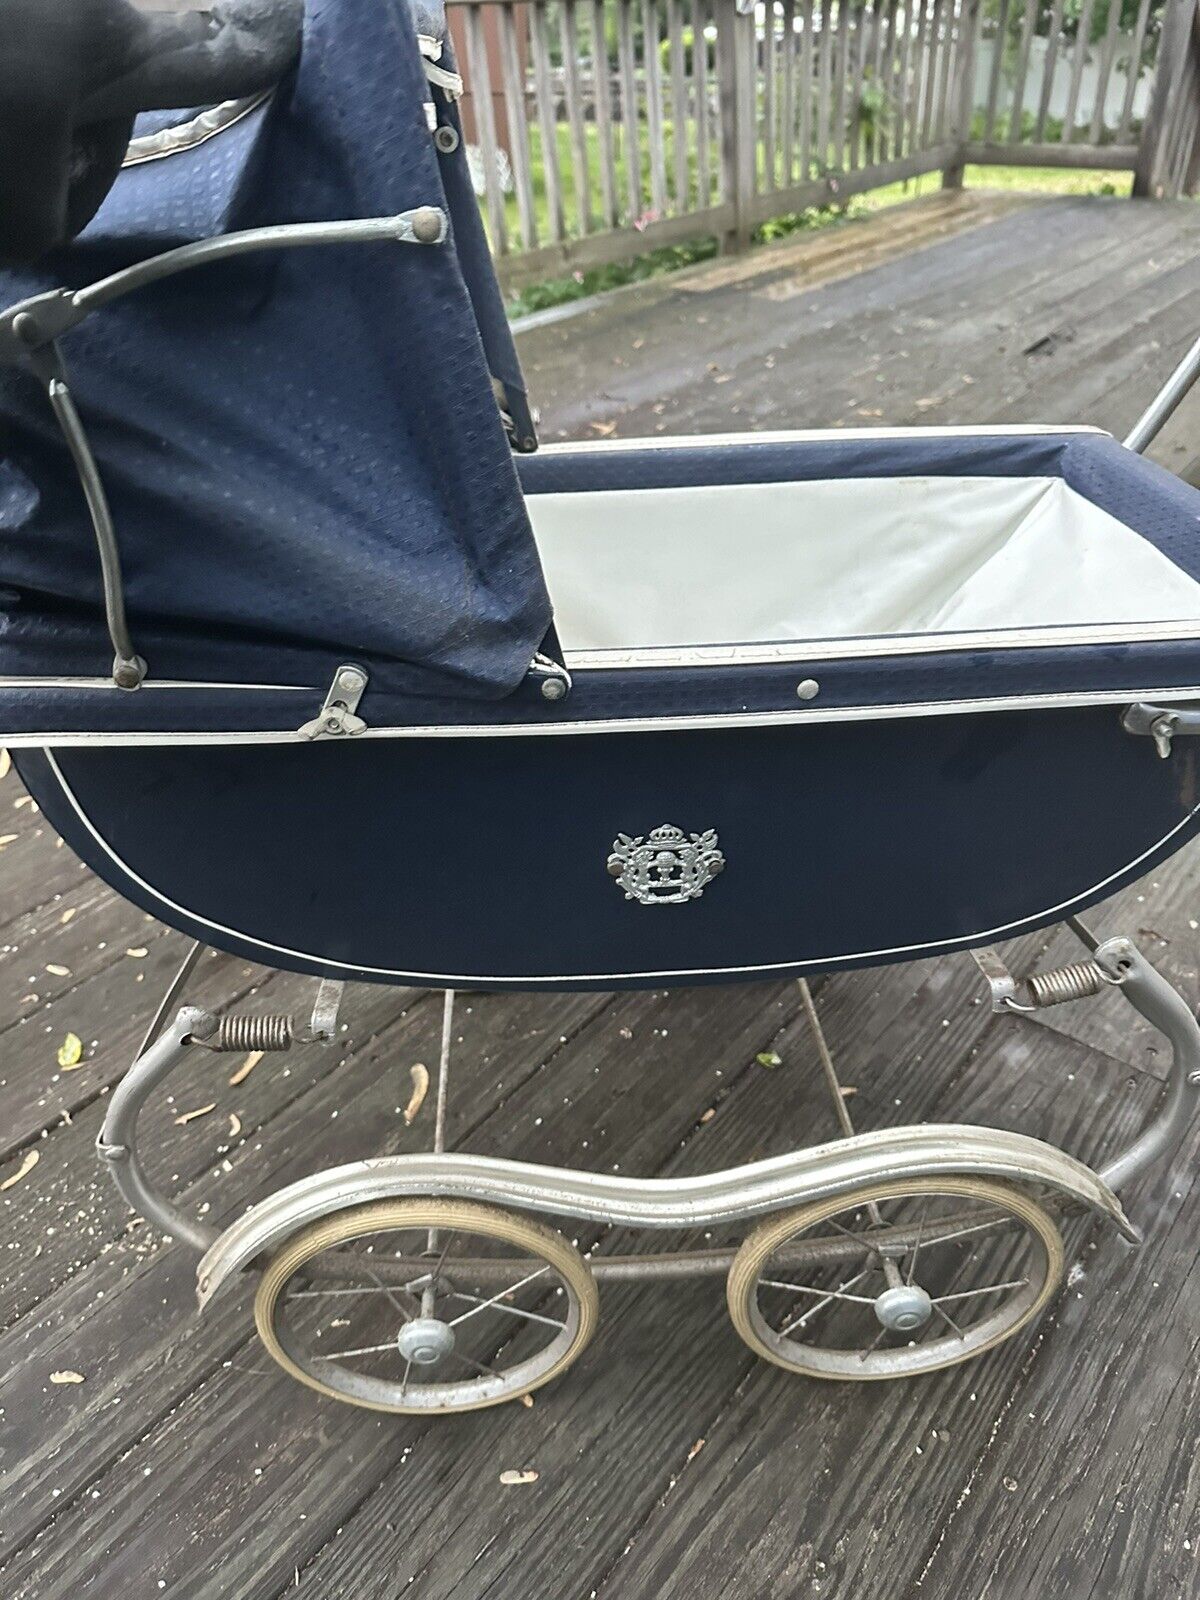 Vintage Antique Crown Baby Doll Stroller Carriage Blue Buggy Buggie Coronet Toy